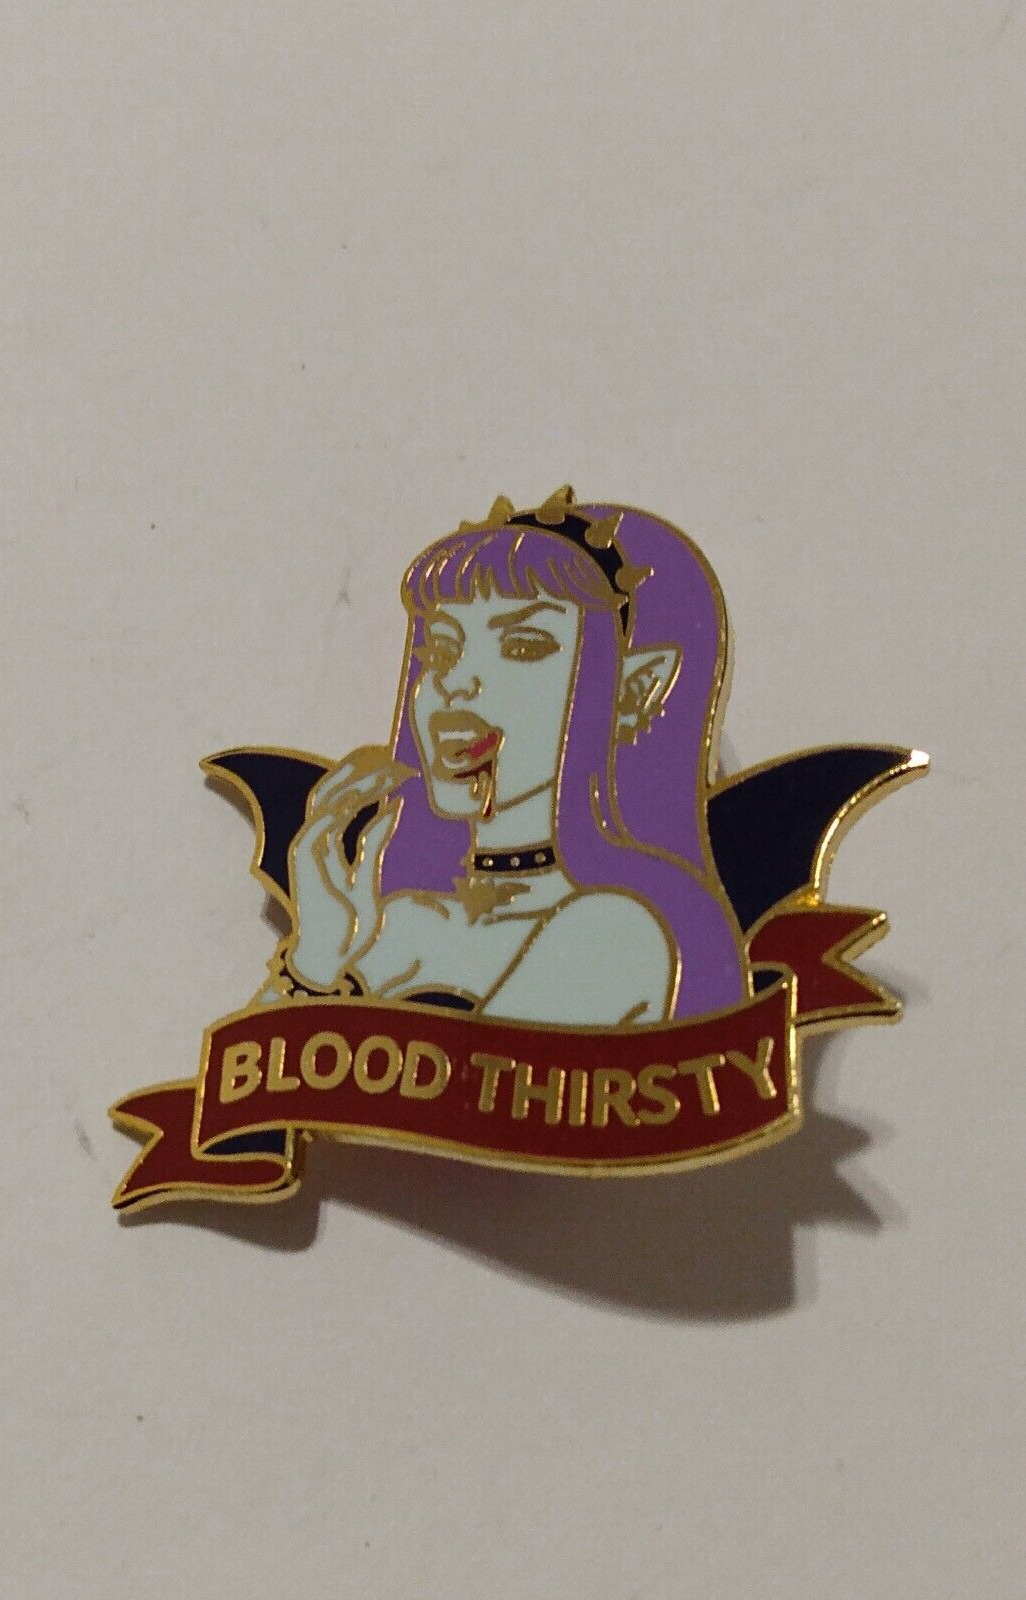 Blood Thirsty Novelty Dual Cluth Lapel Pin